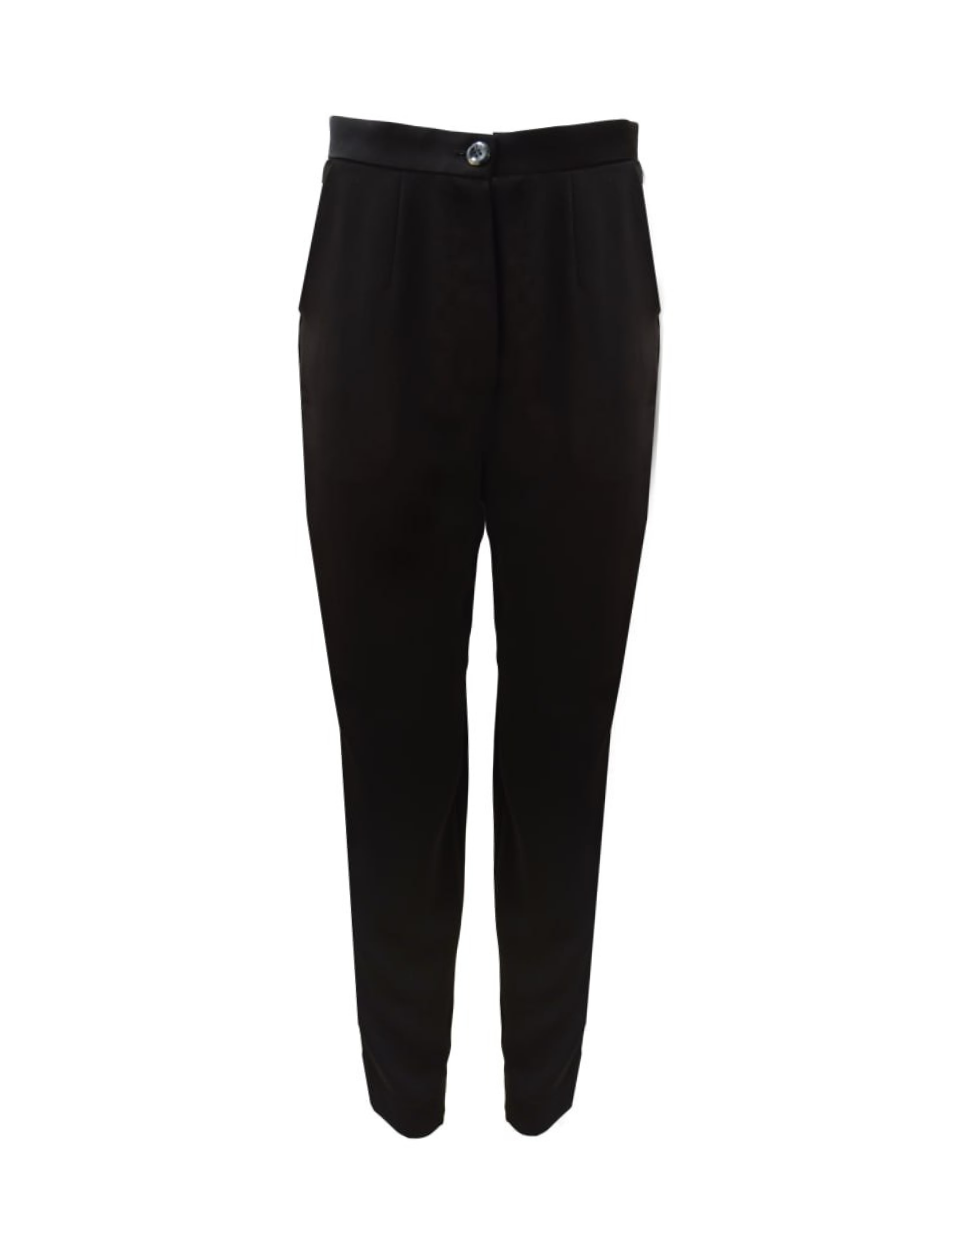 NO.3 Tailored Trousers (Black)